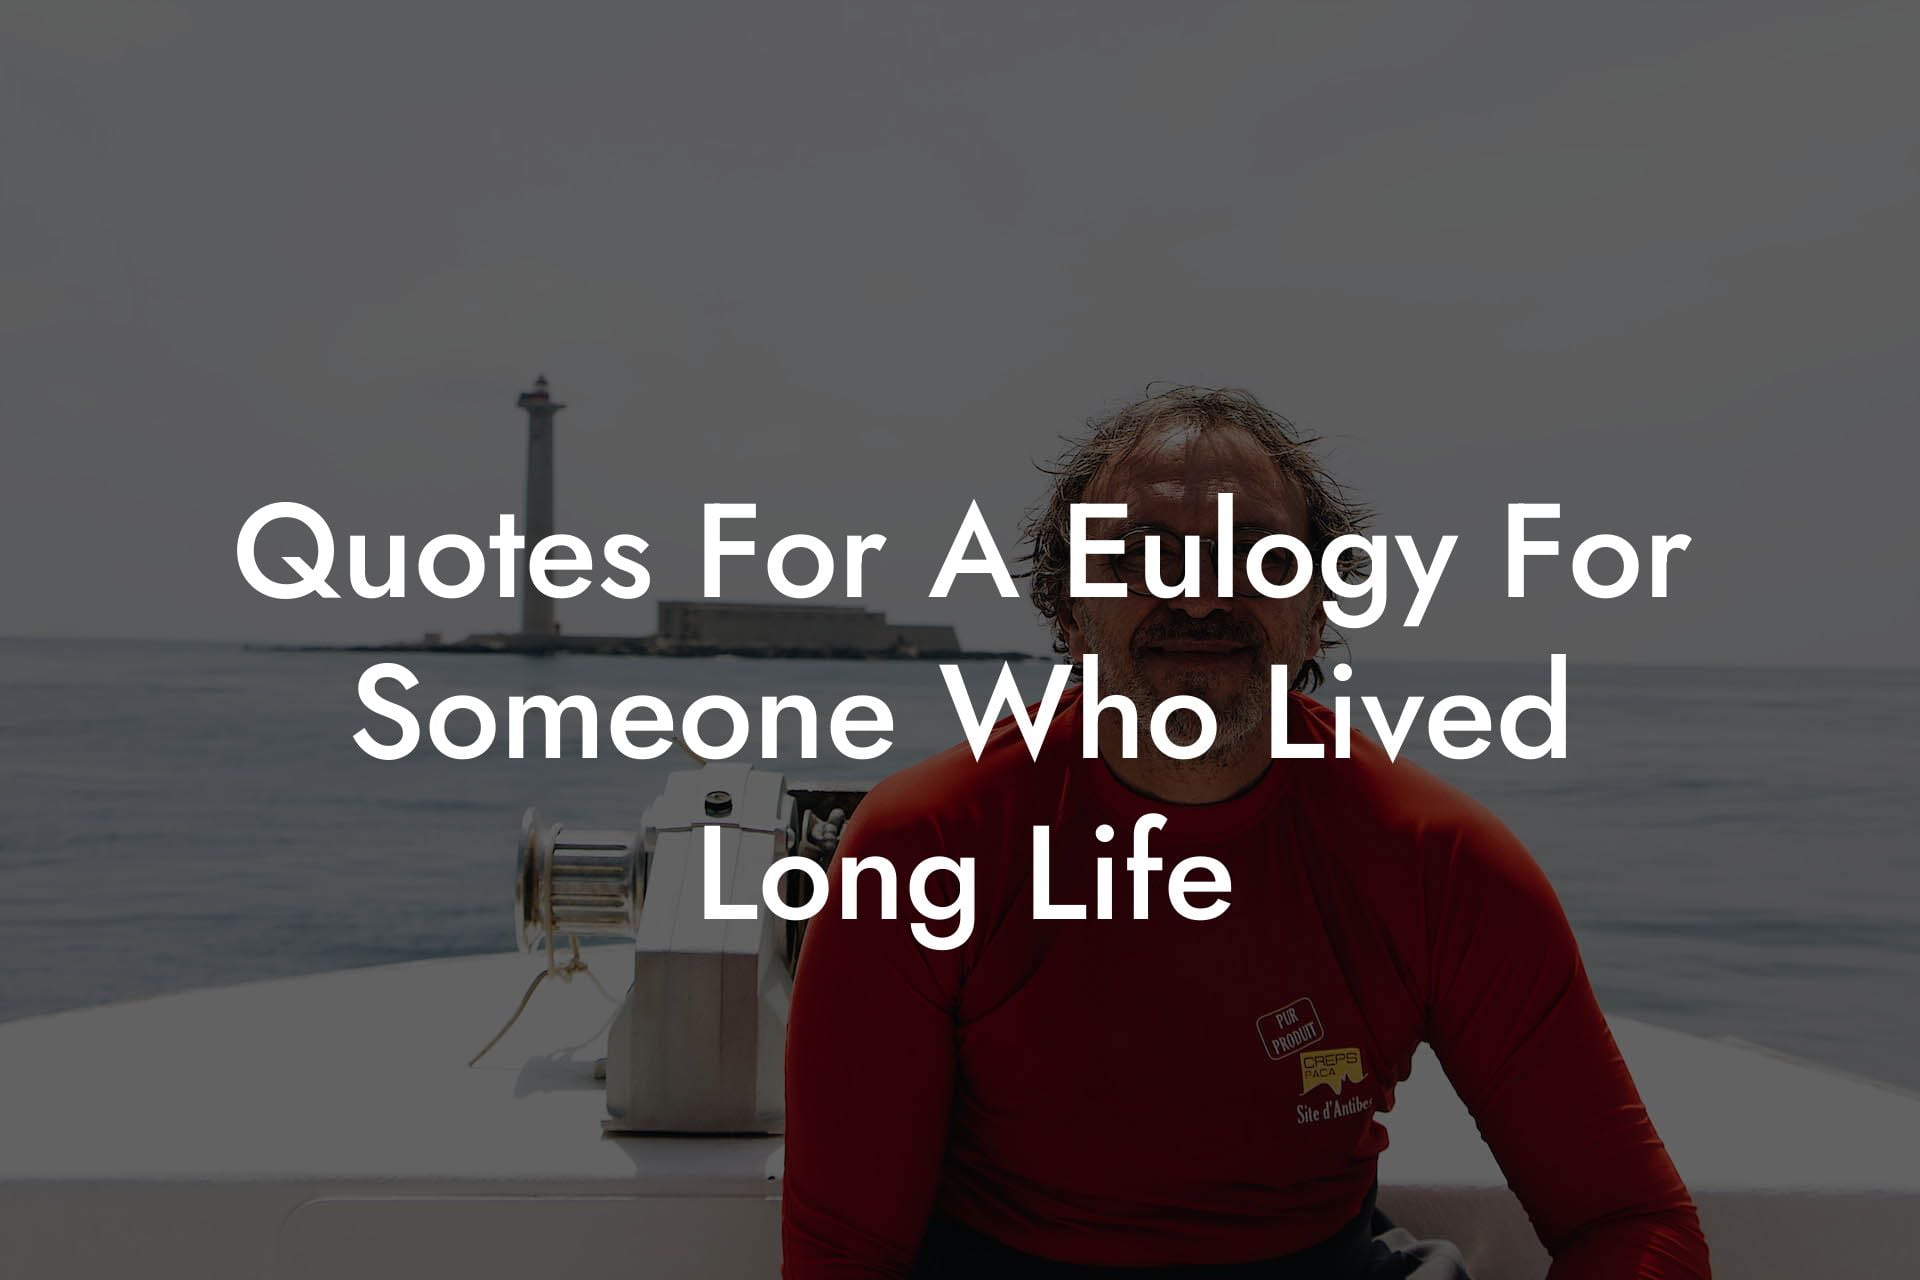 Quotes For A Eulogy For Someone Who Lived Long Life